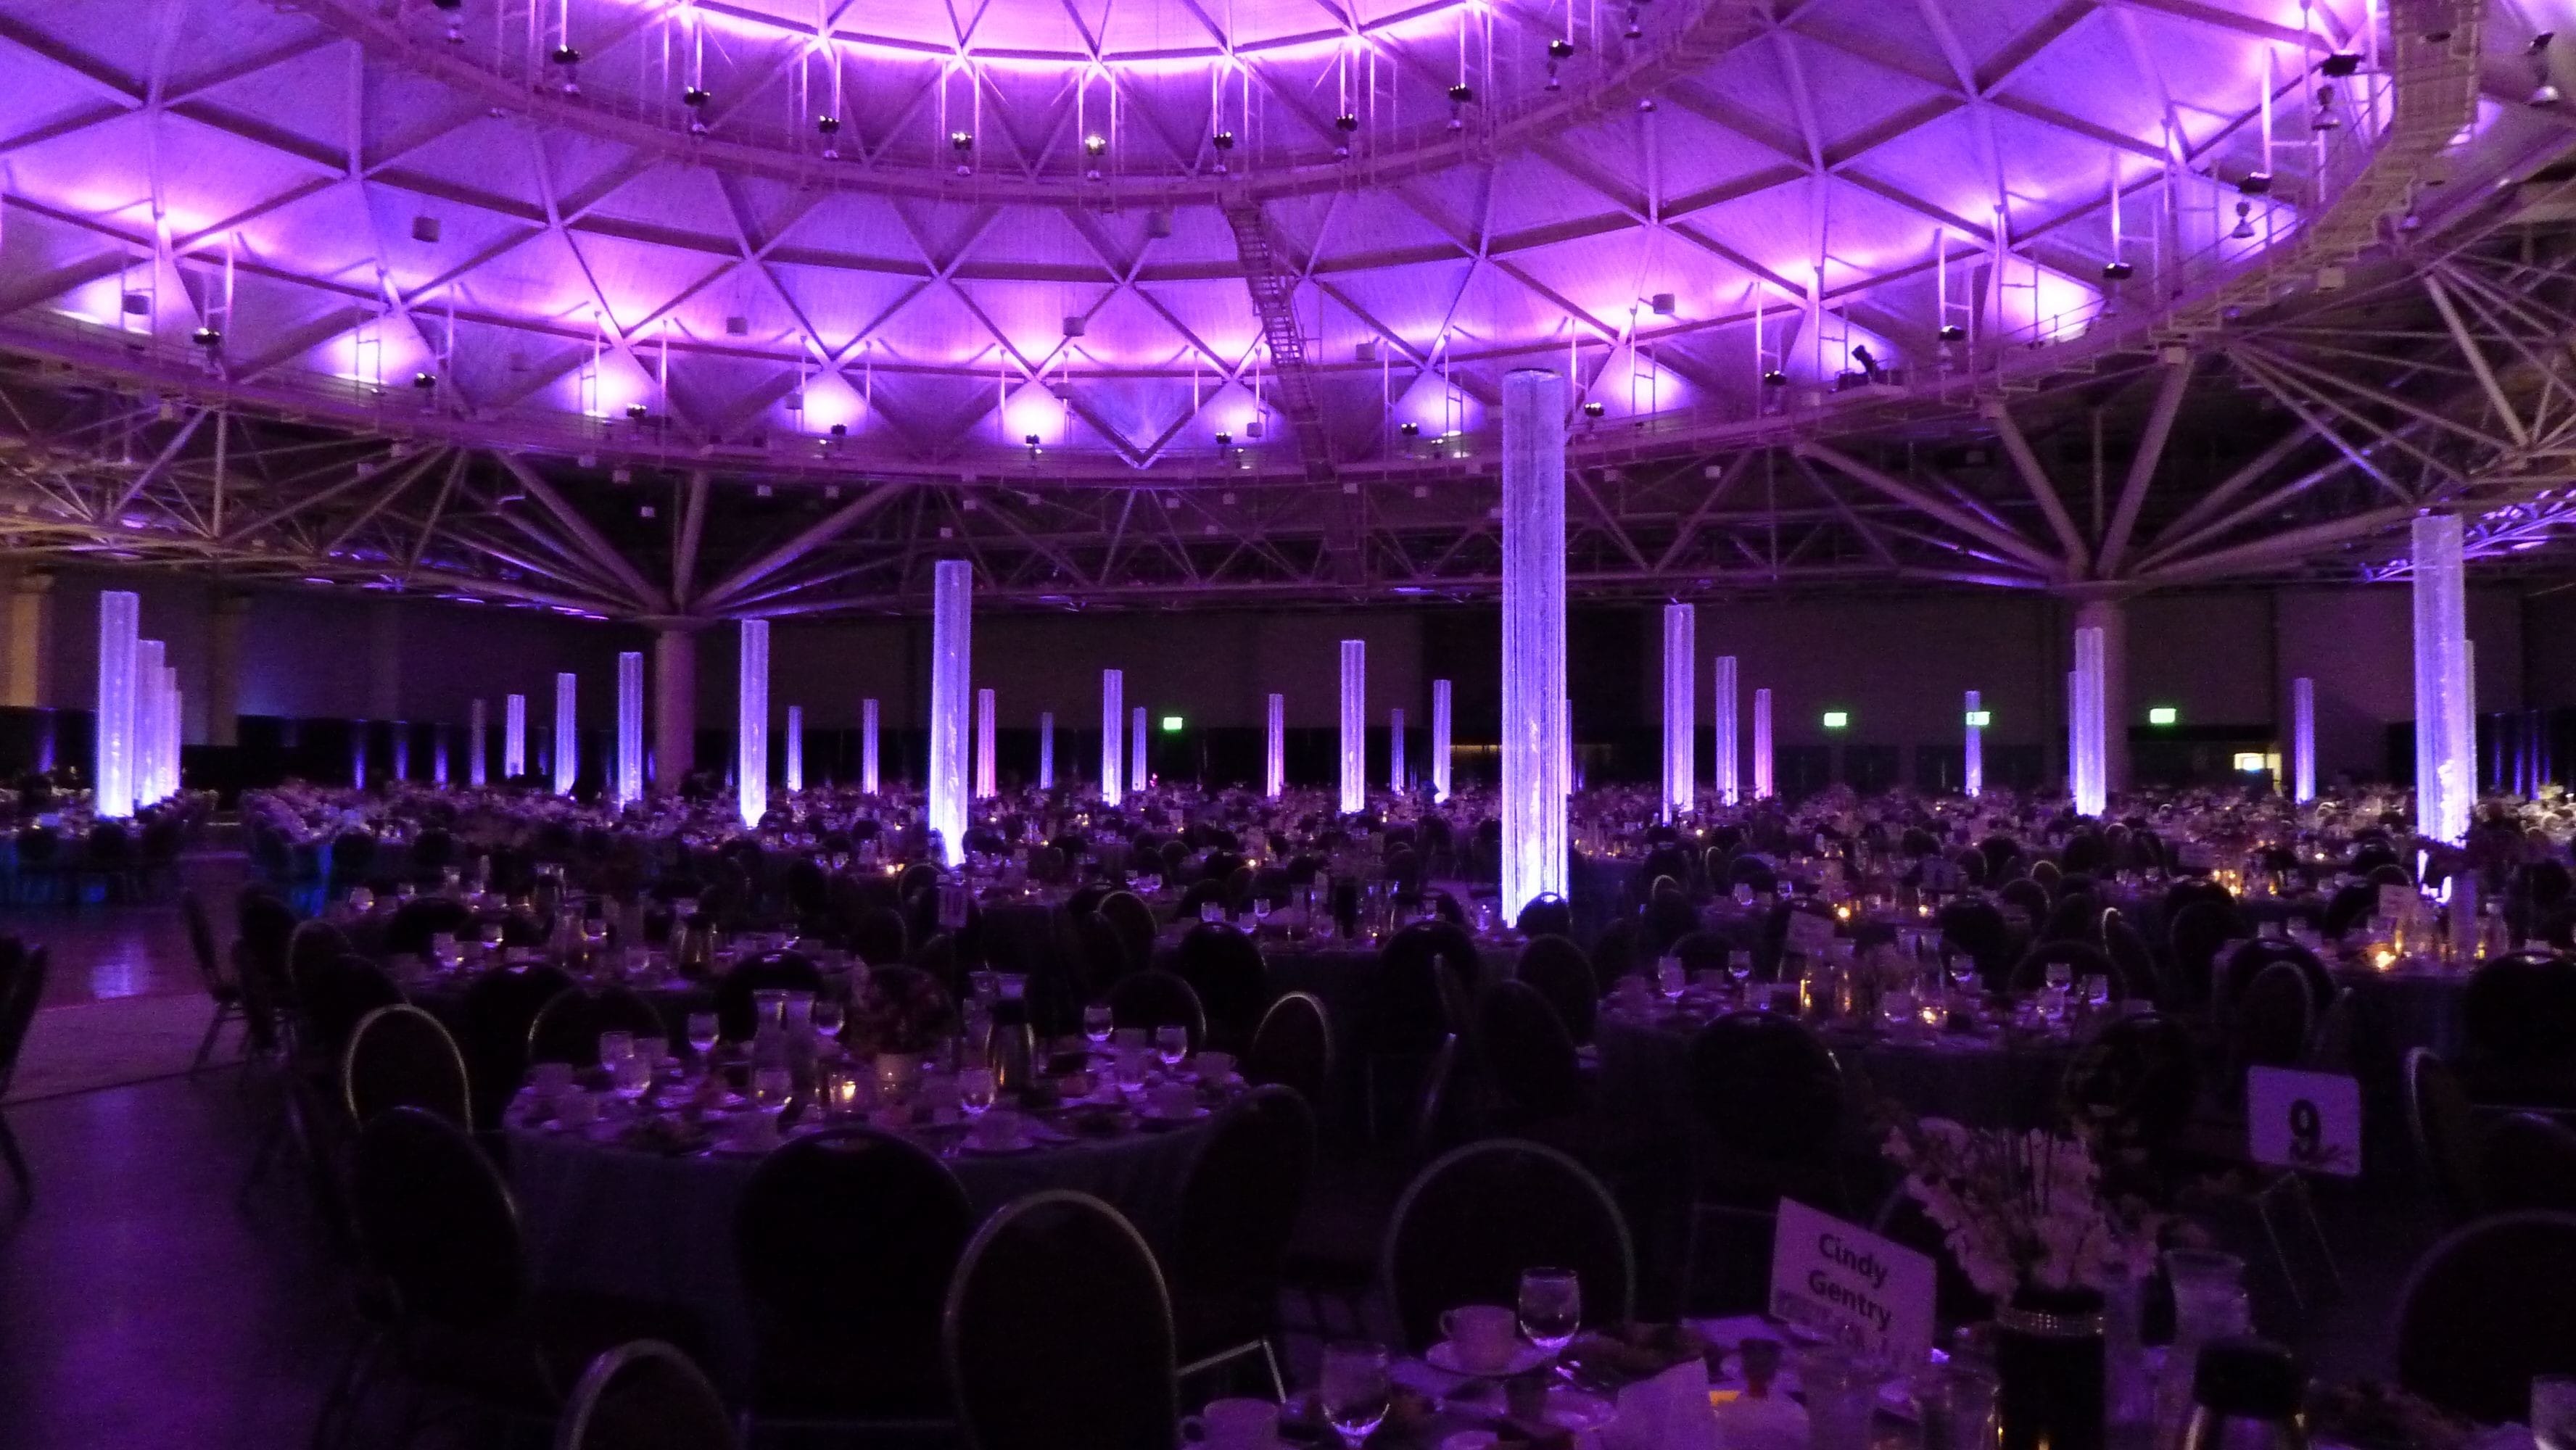 Minneapolis Convention Center event with decor by Event Lab, Lighting by Duluth Event Lighting.